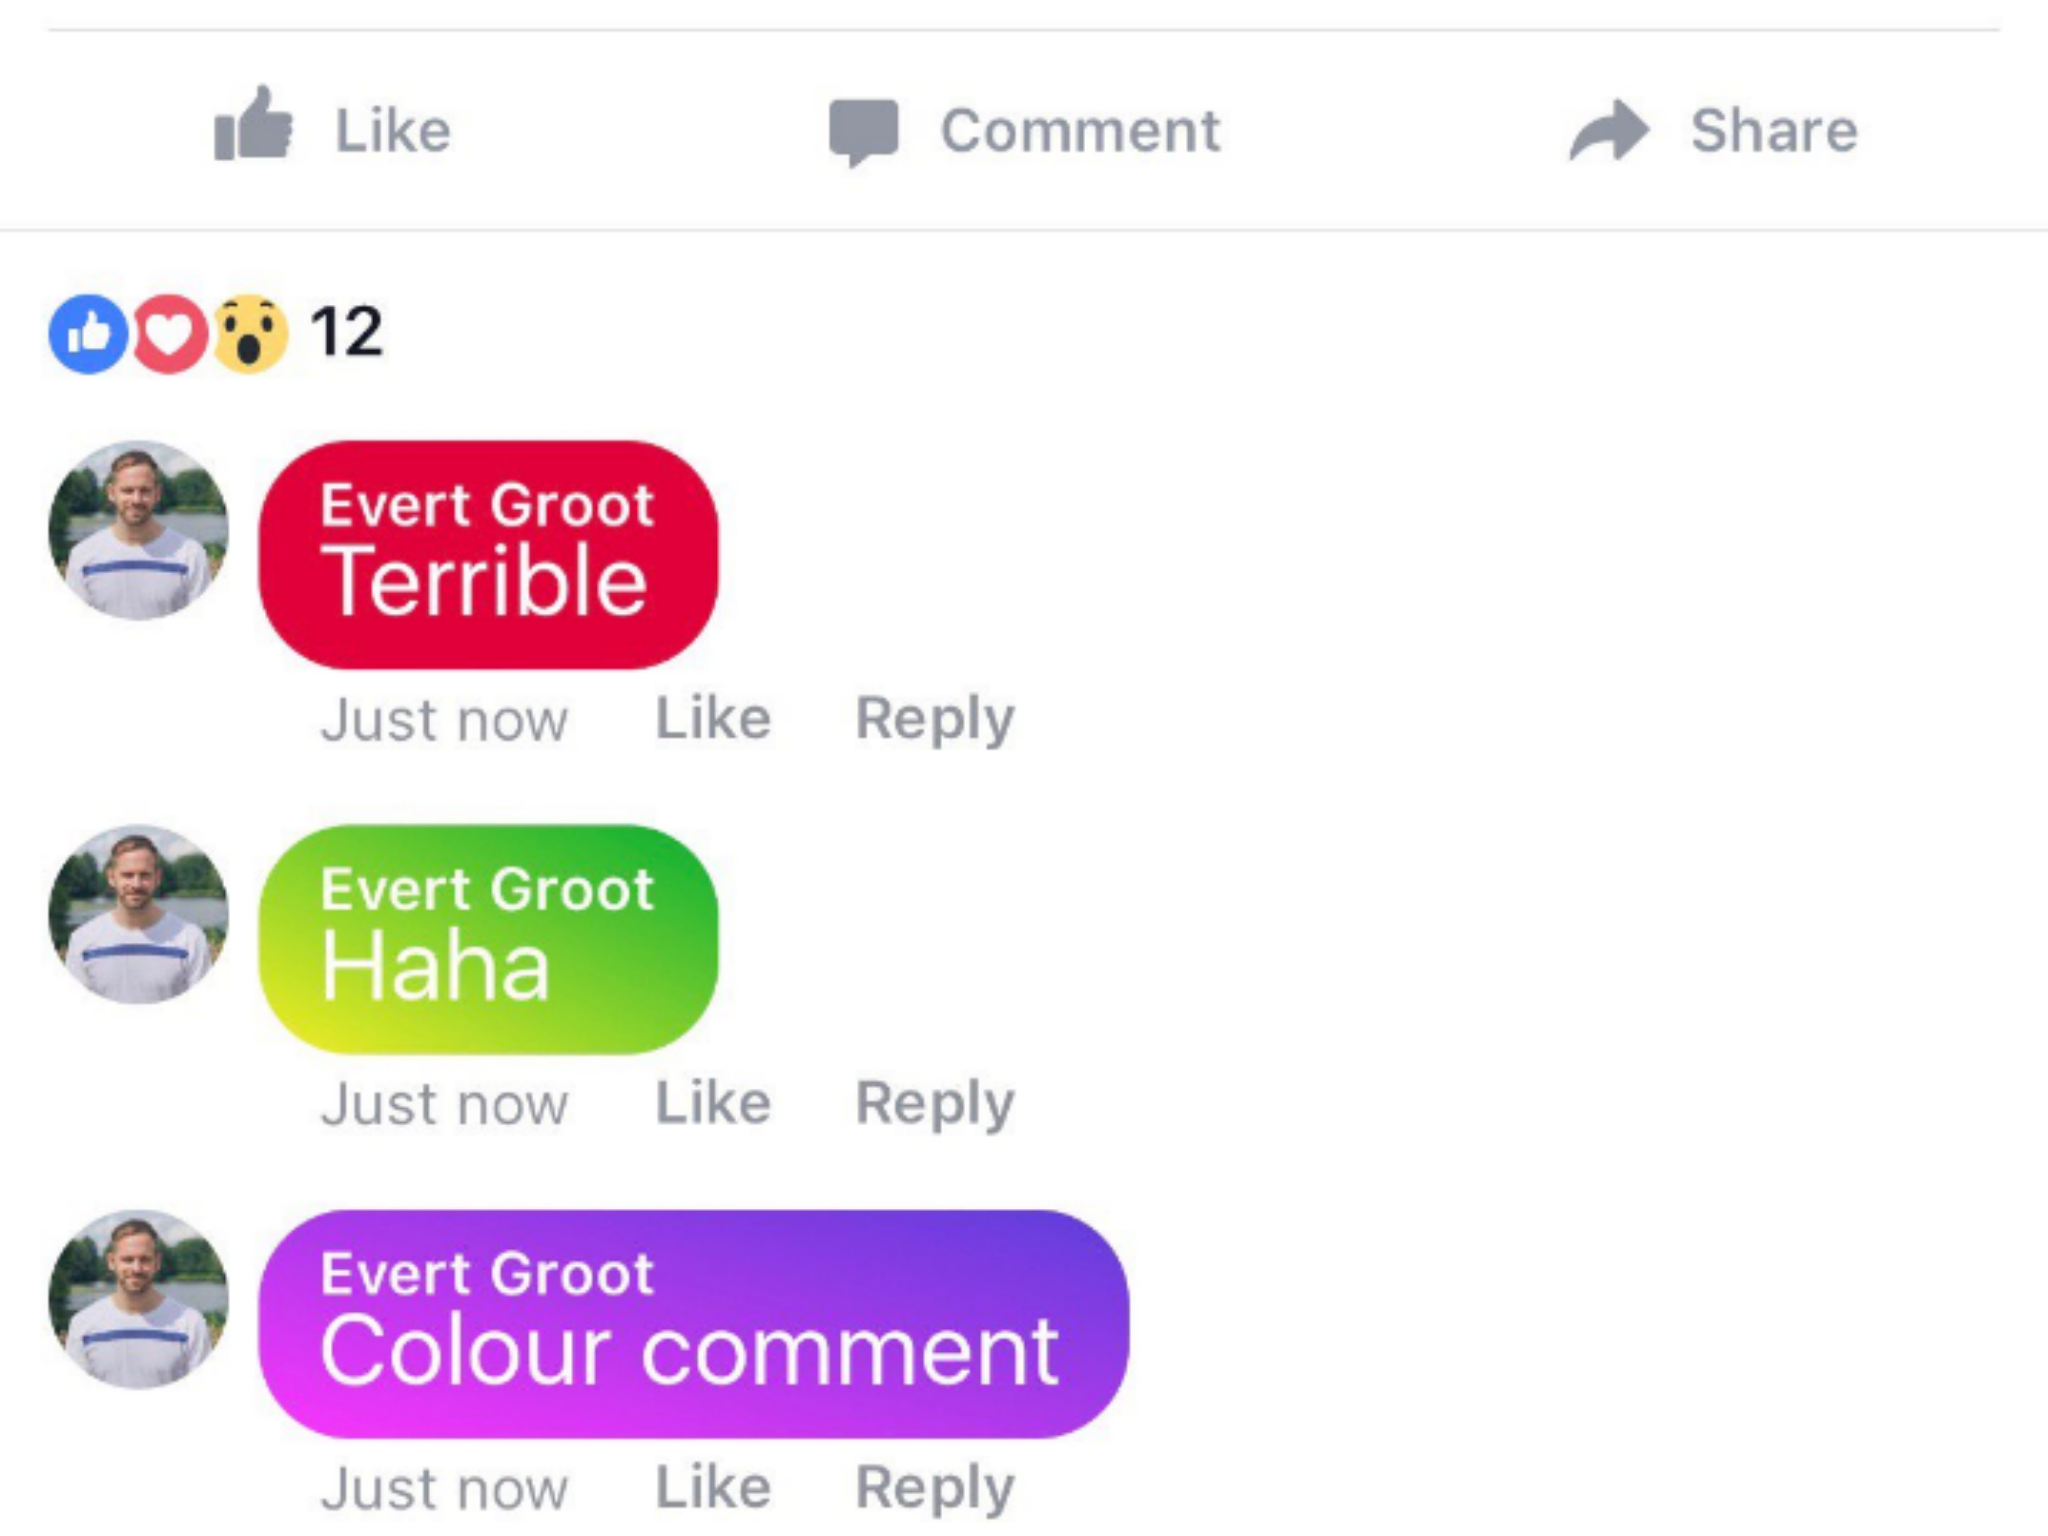 Facebook introduced colourful backgrounds for status updates earlier this year